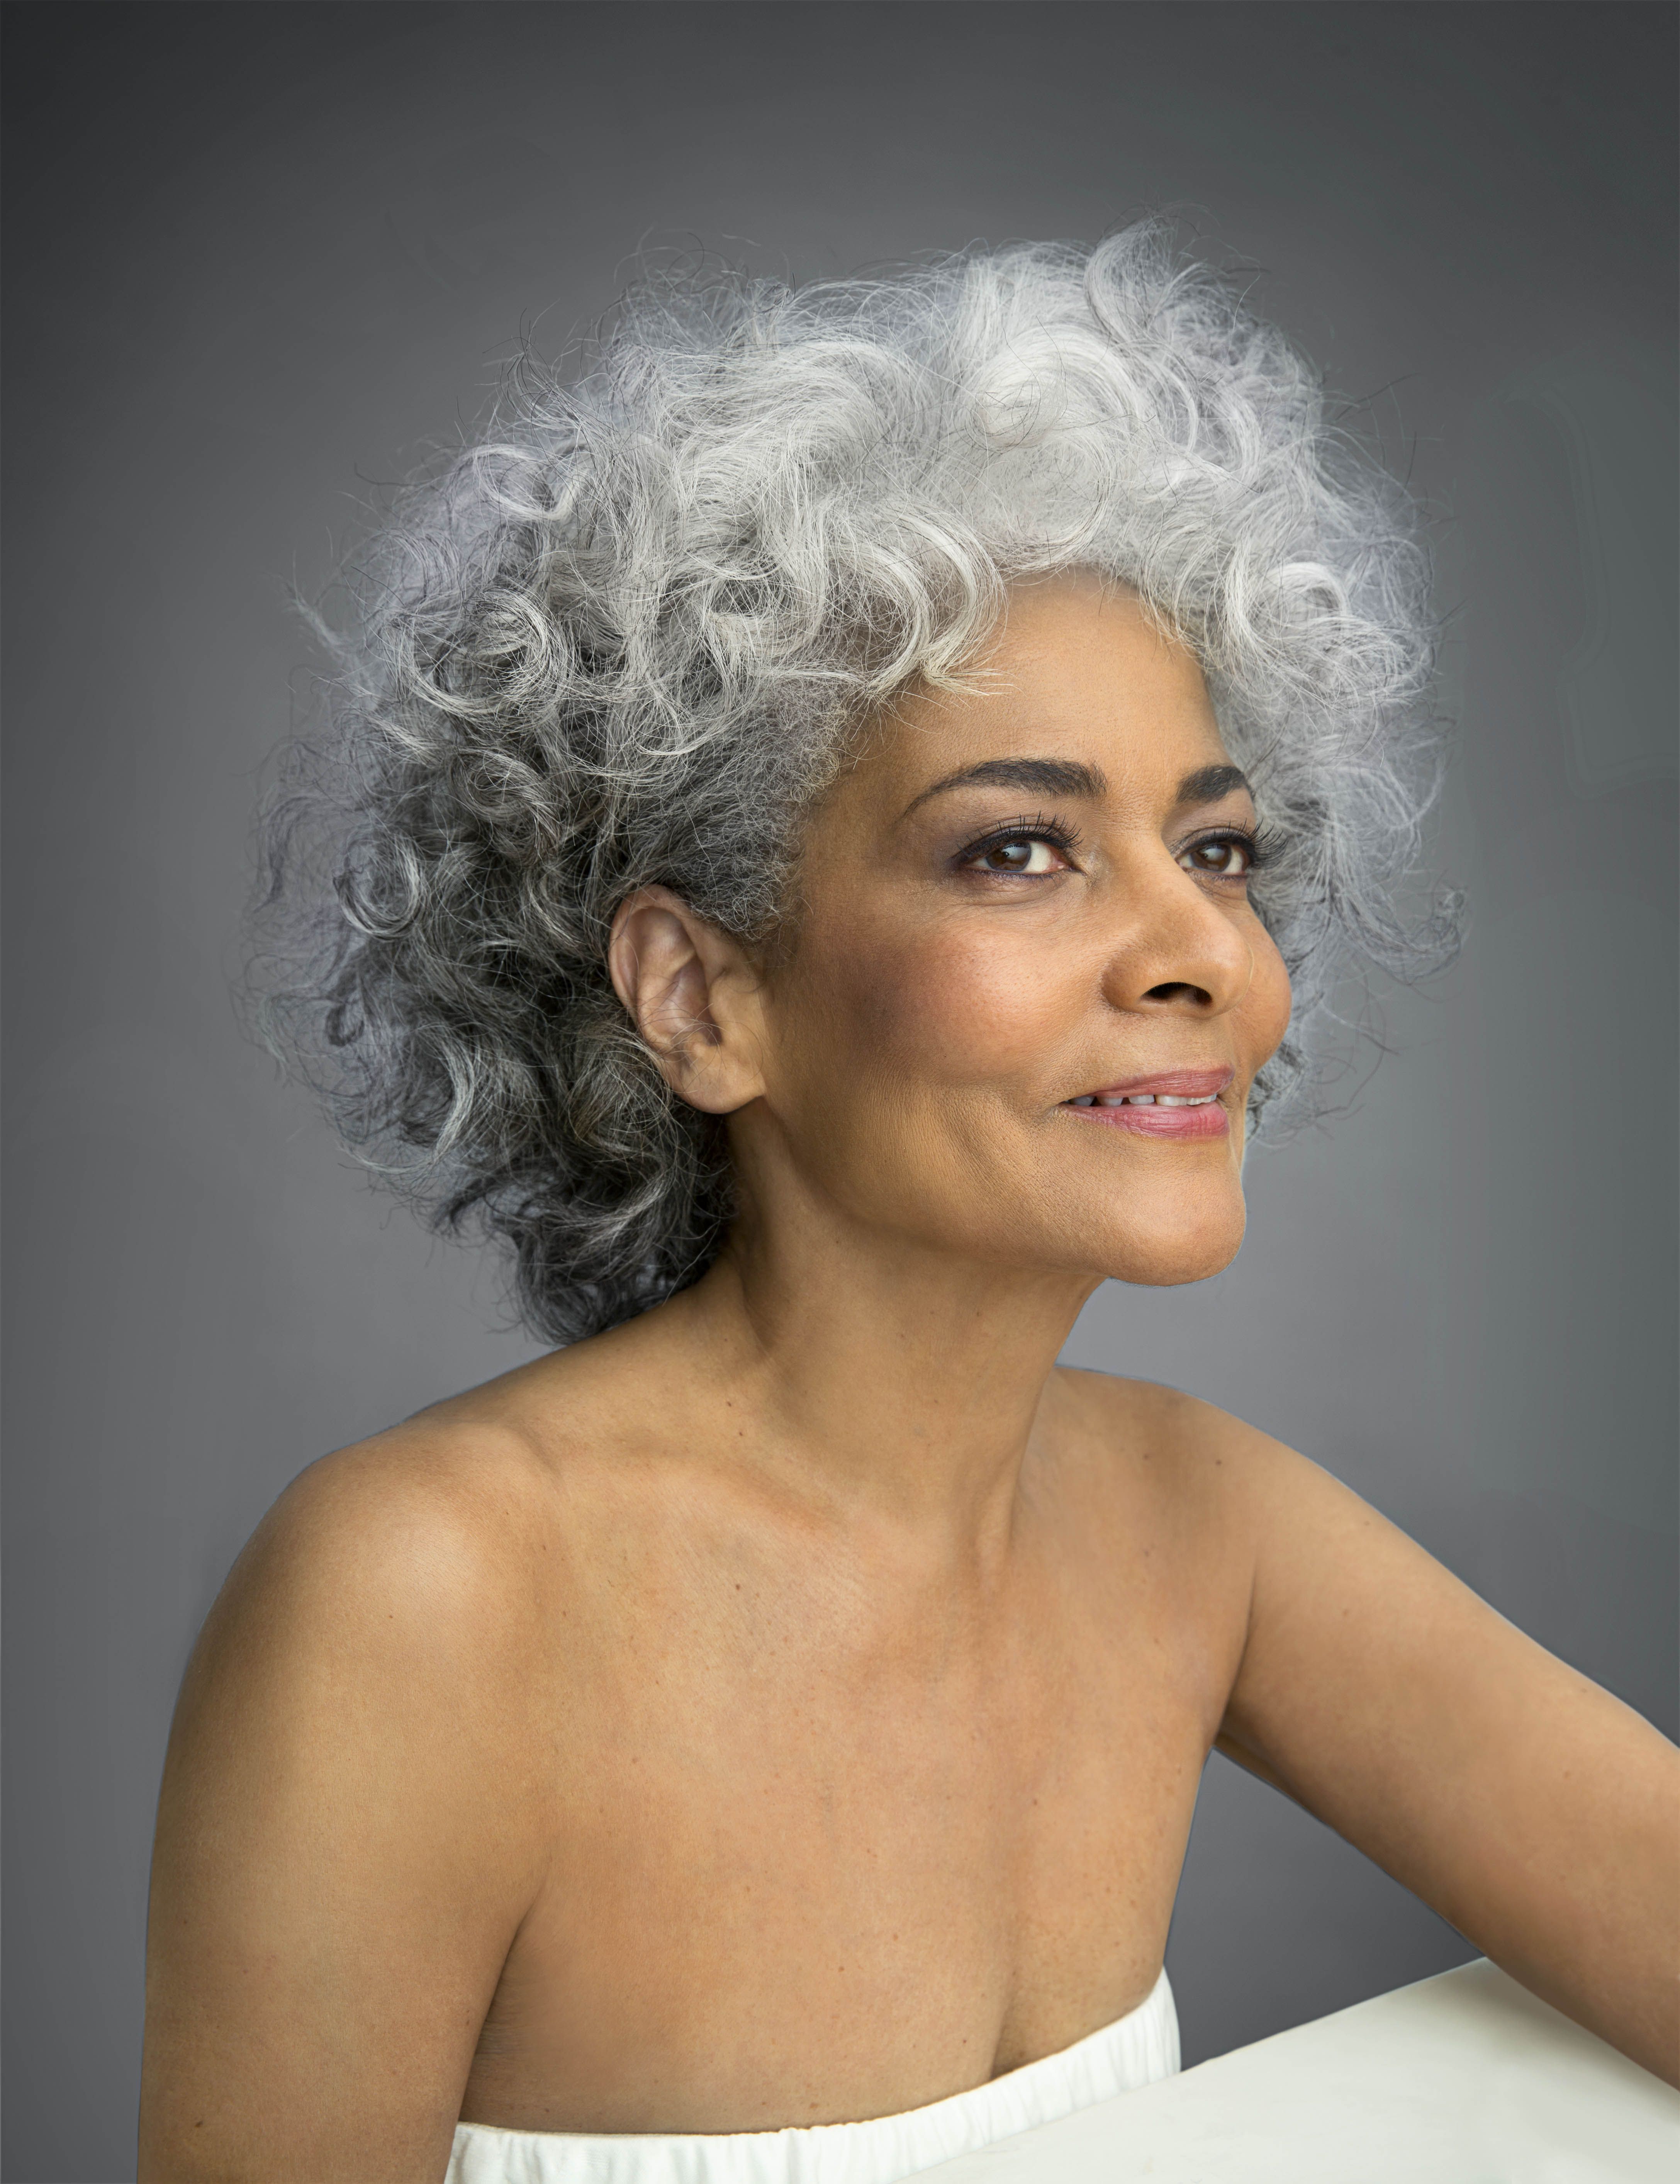 What Causes Gray Hair And Other Questions, Answered